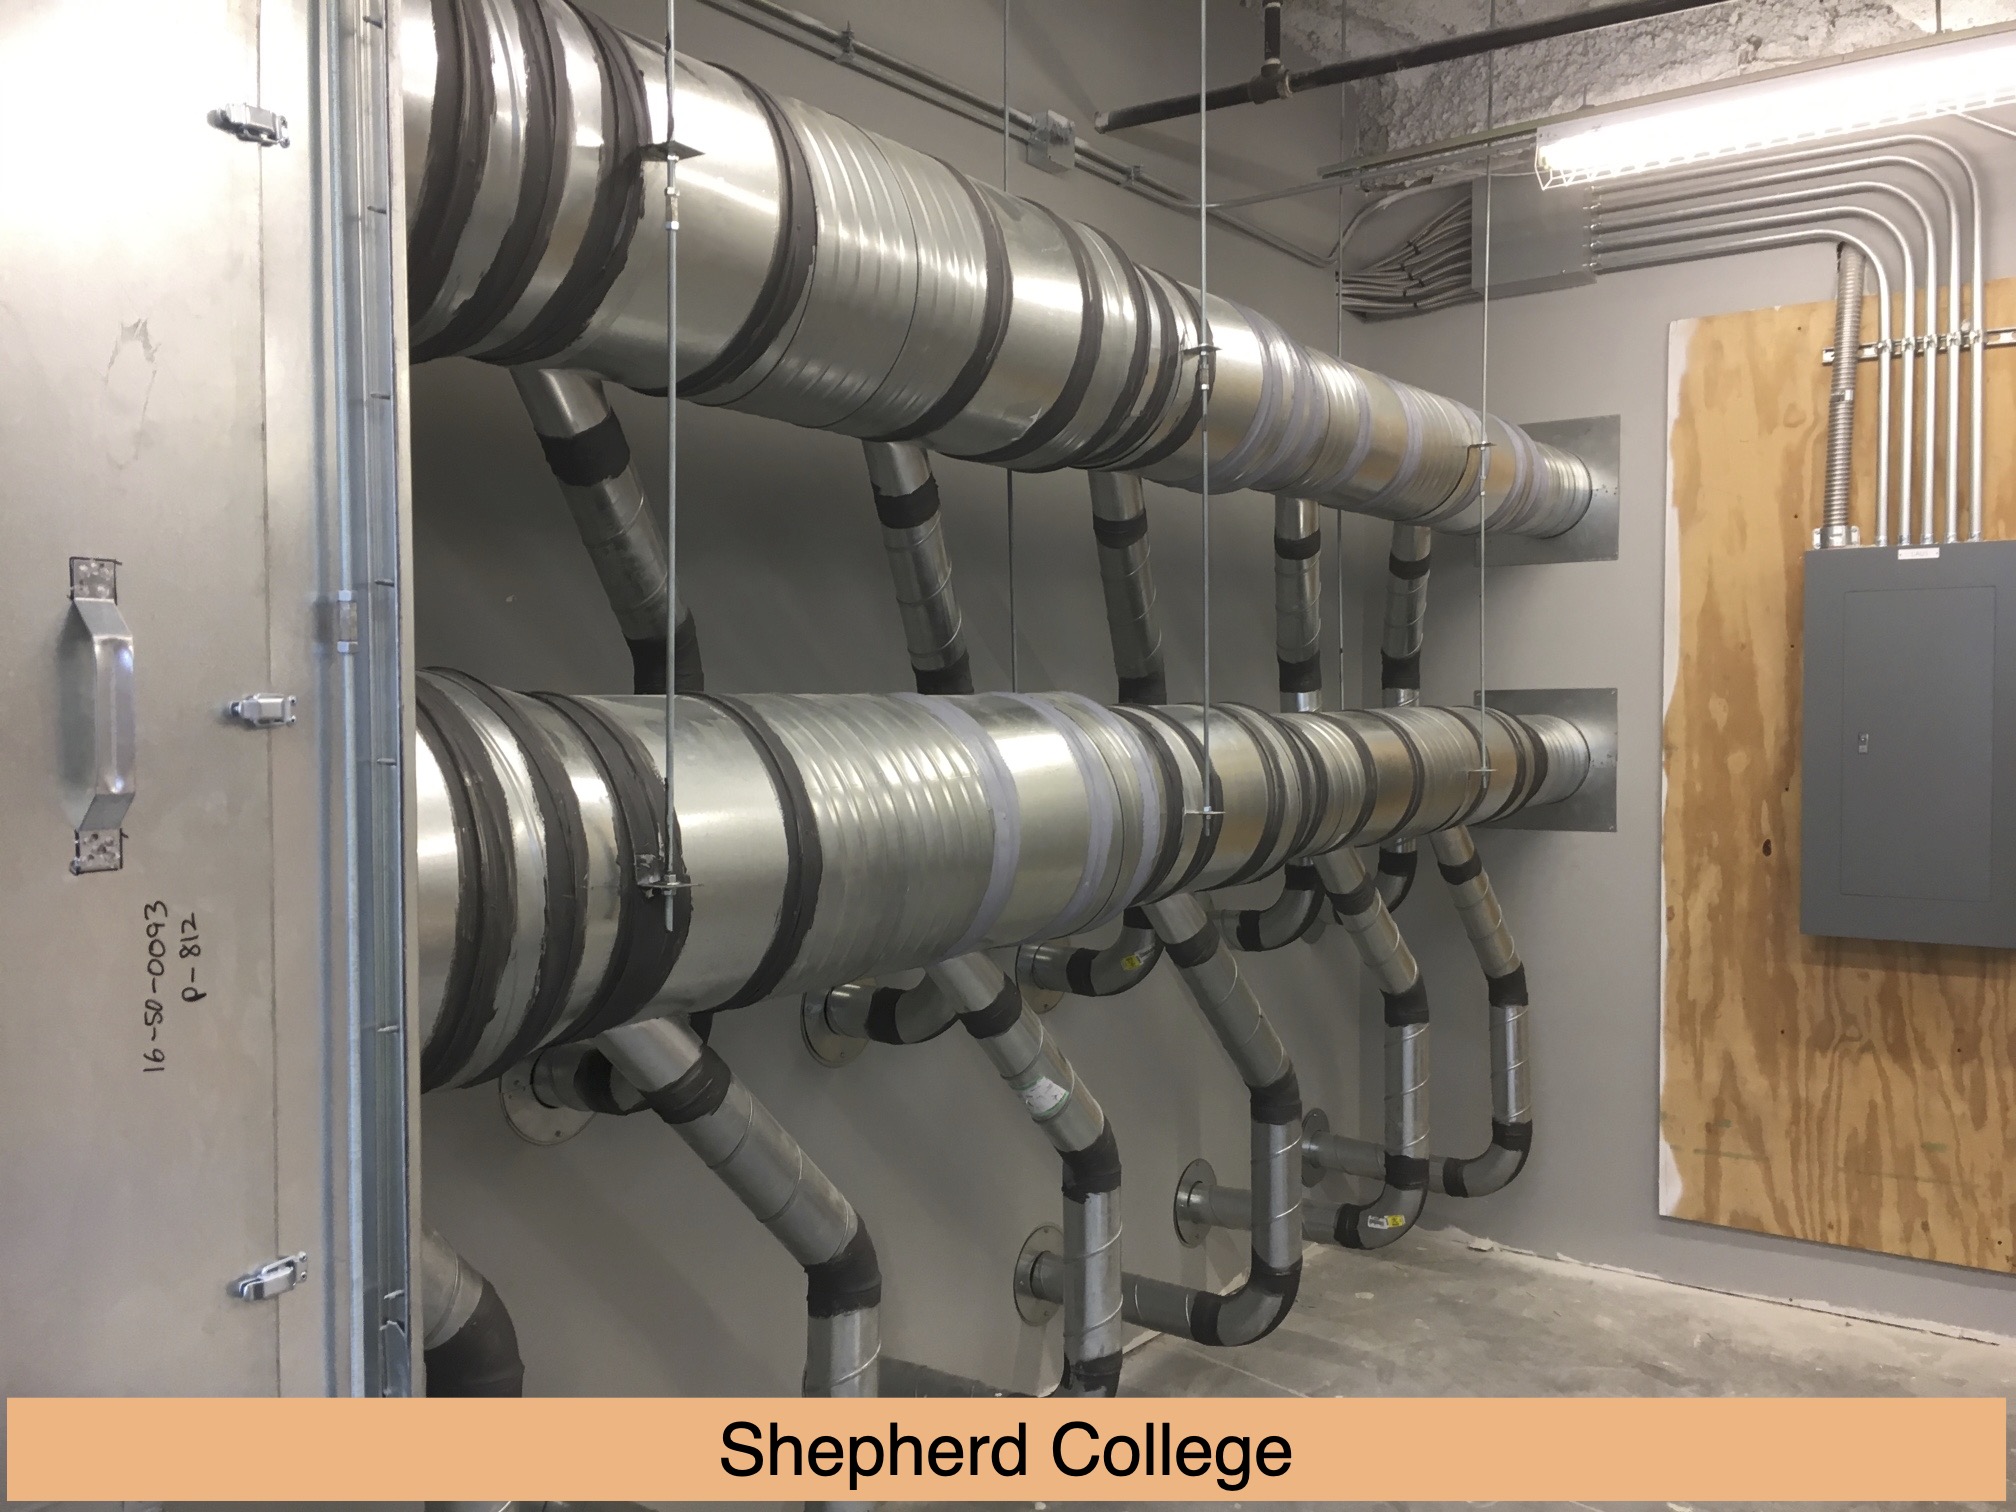 Kaempf & Harris working on vHVAC systems at Shepard College